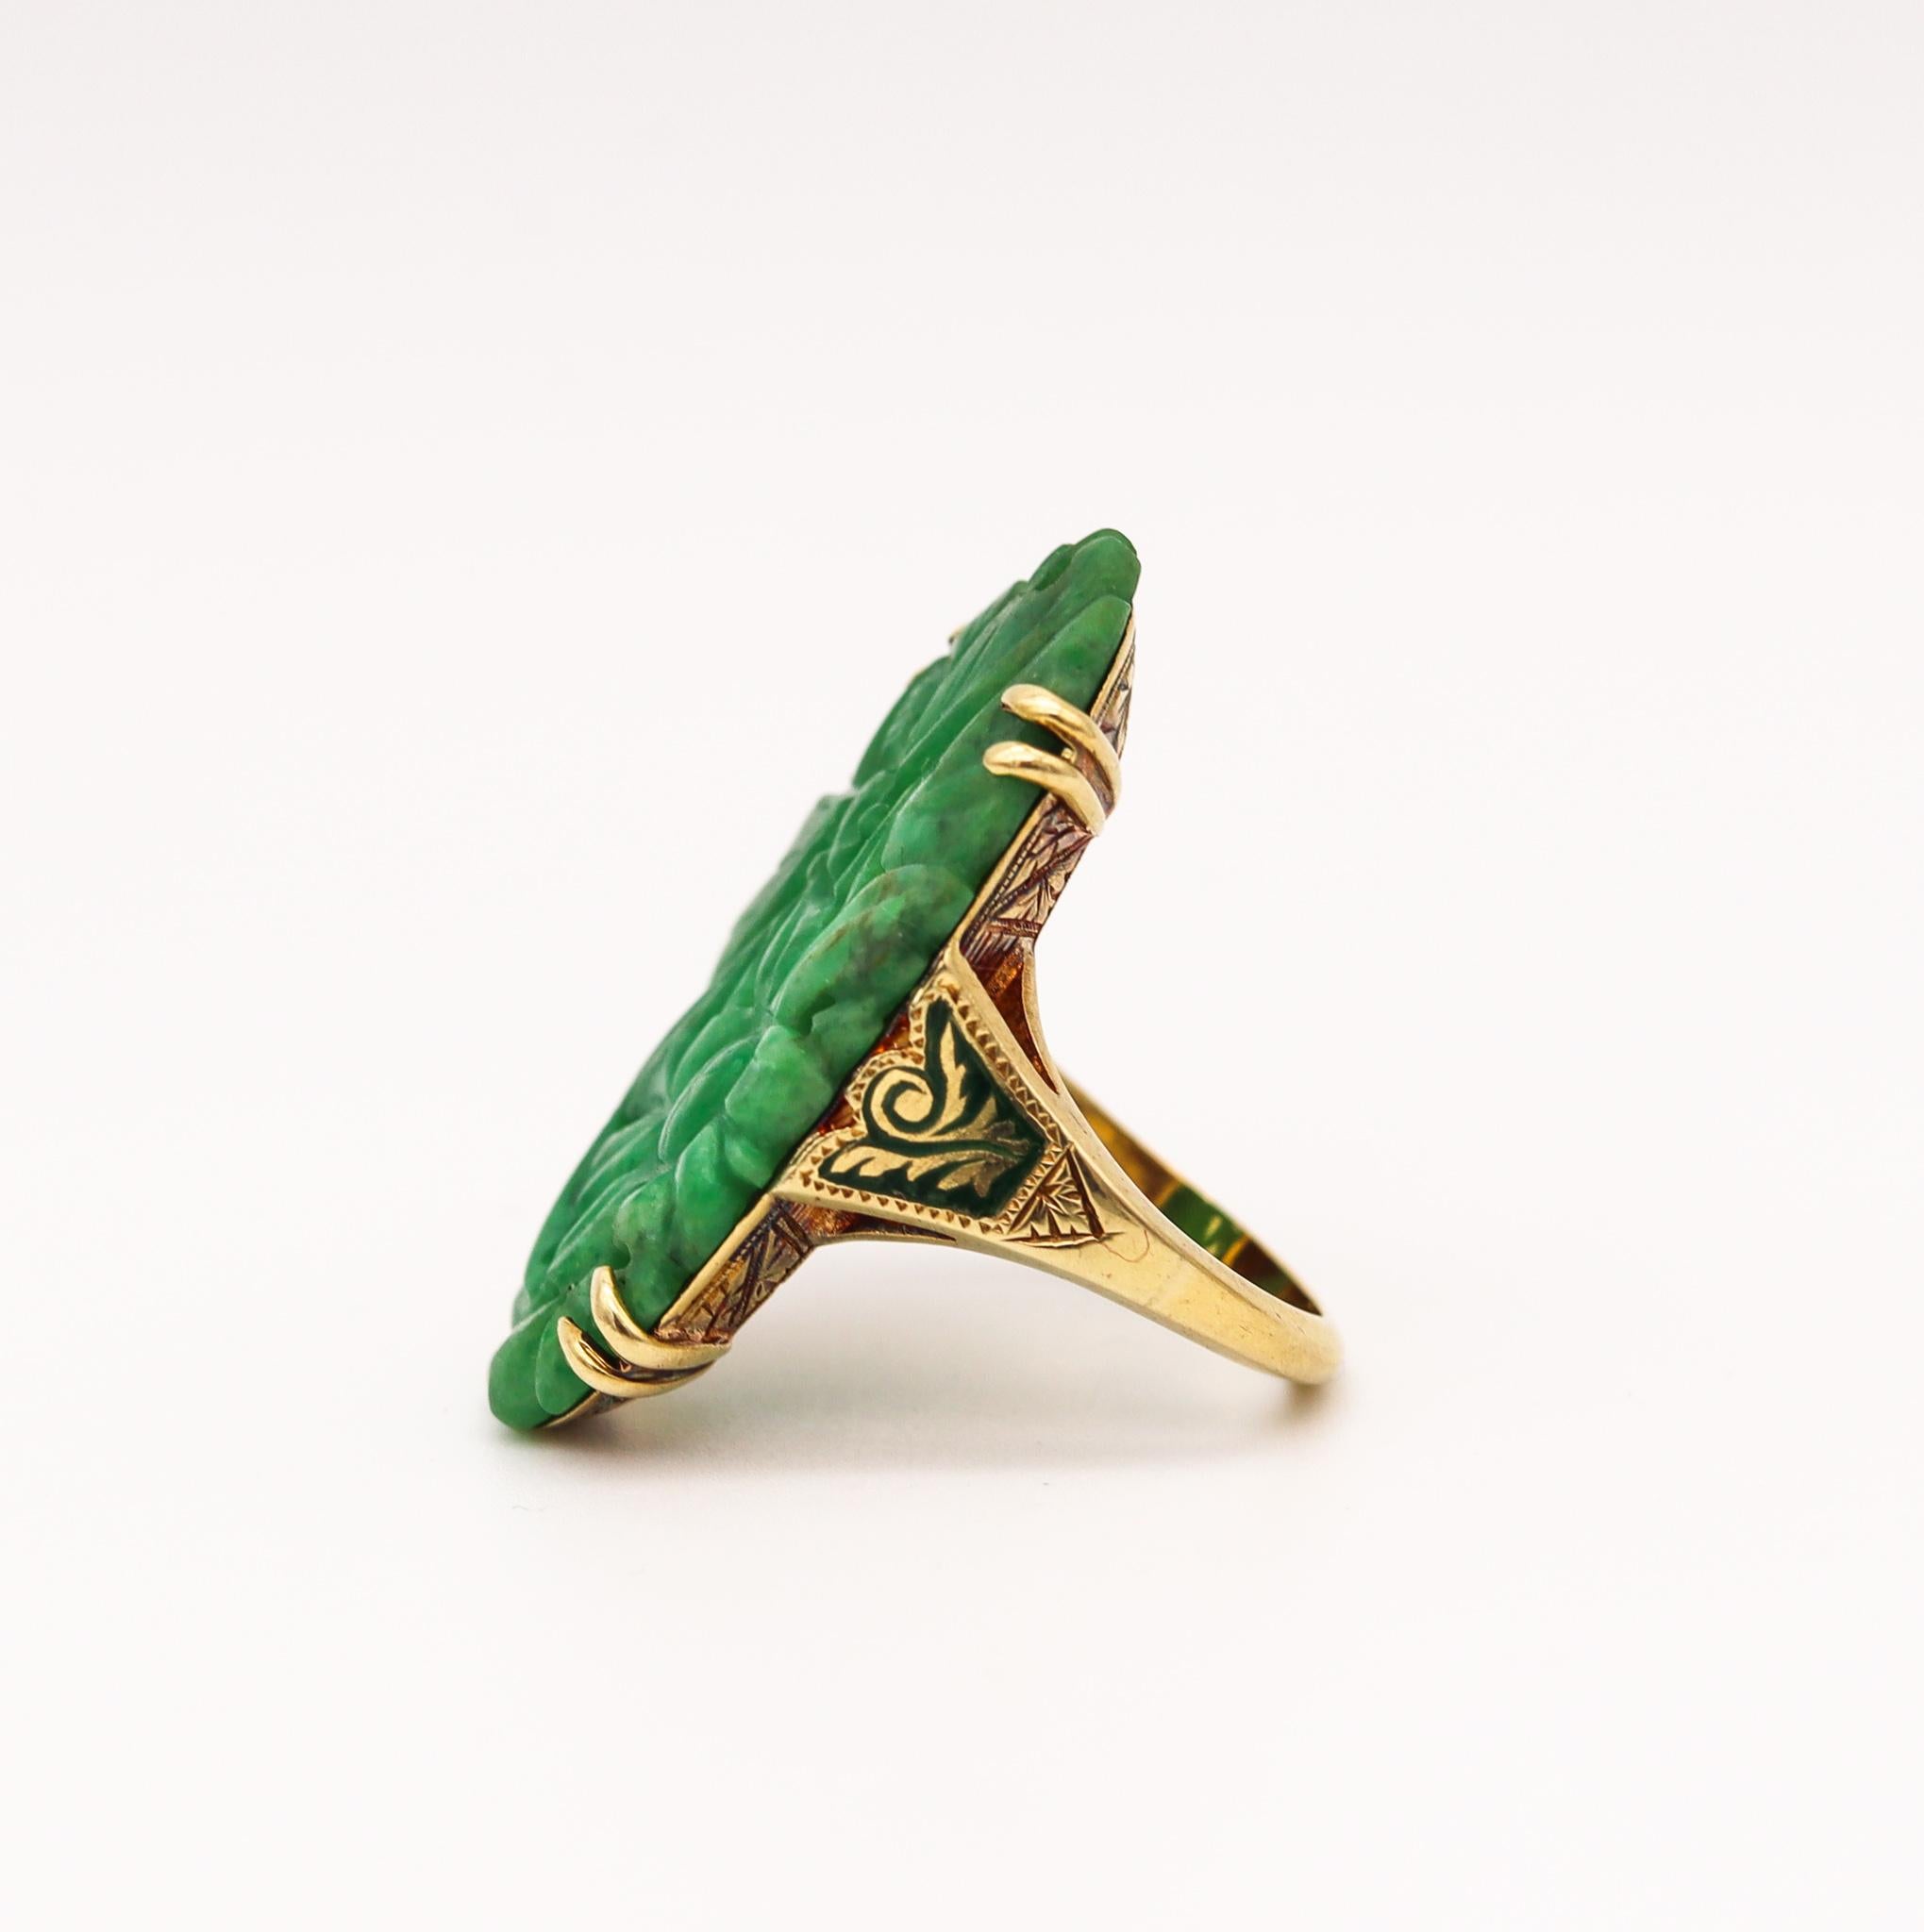 An art deco chinoiserie cocktail ring.

Beautiful piece, created during the American art deco period, circa 1925. This ring has been crafted in solid yellow gold of 14 karats with a galeria exceptionally decorated with incised and engraved geometric